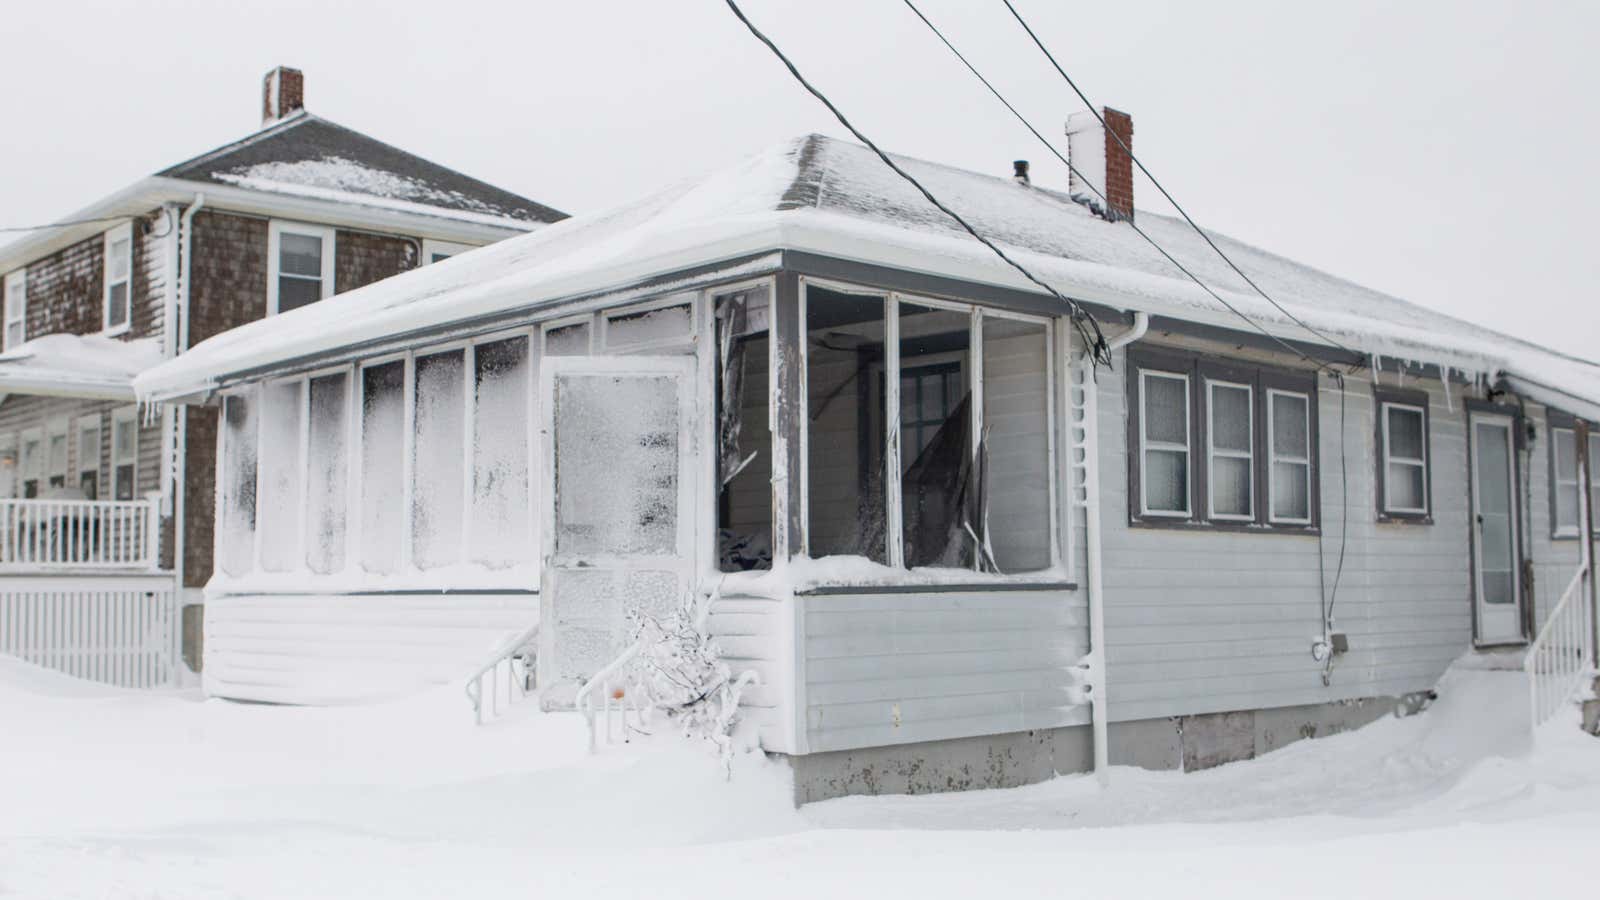 Heating costs are rising fast in the northeast US as winter looms